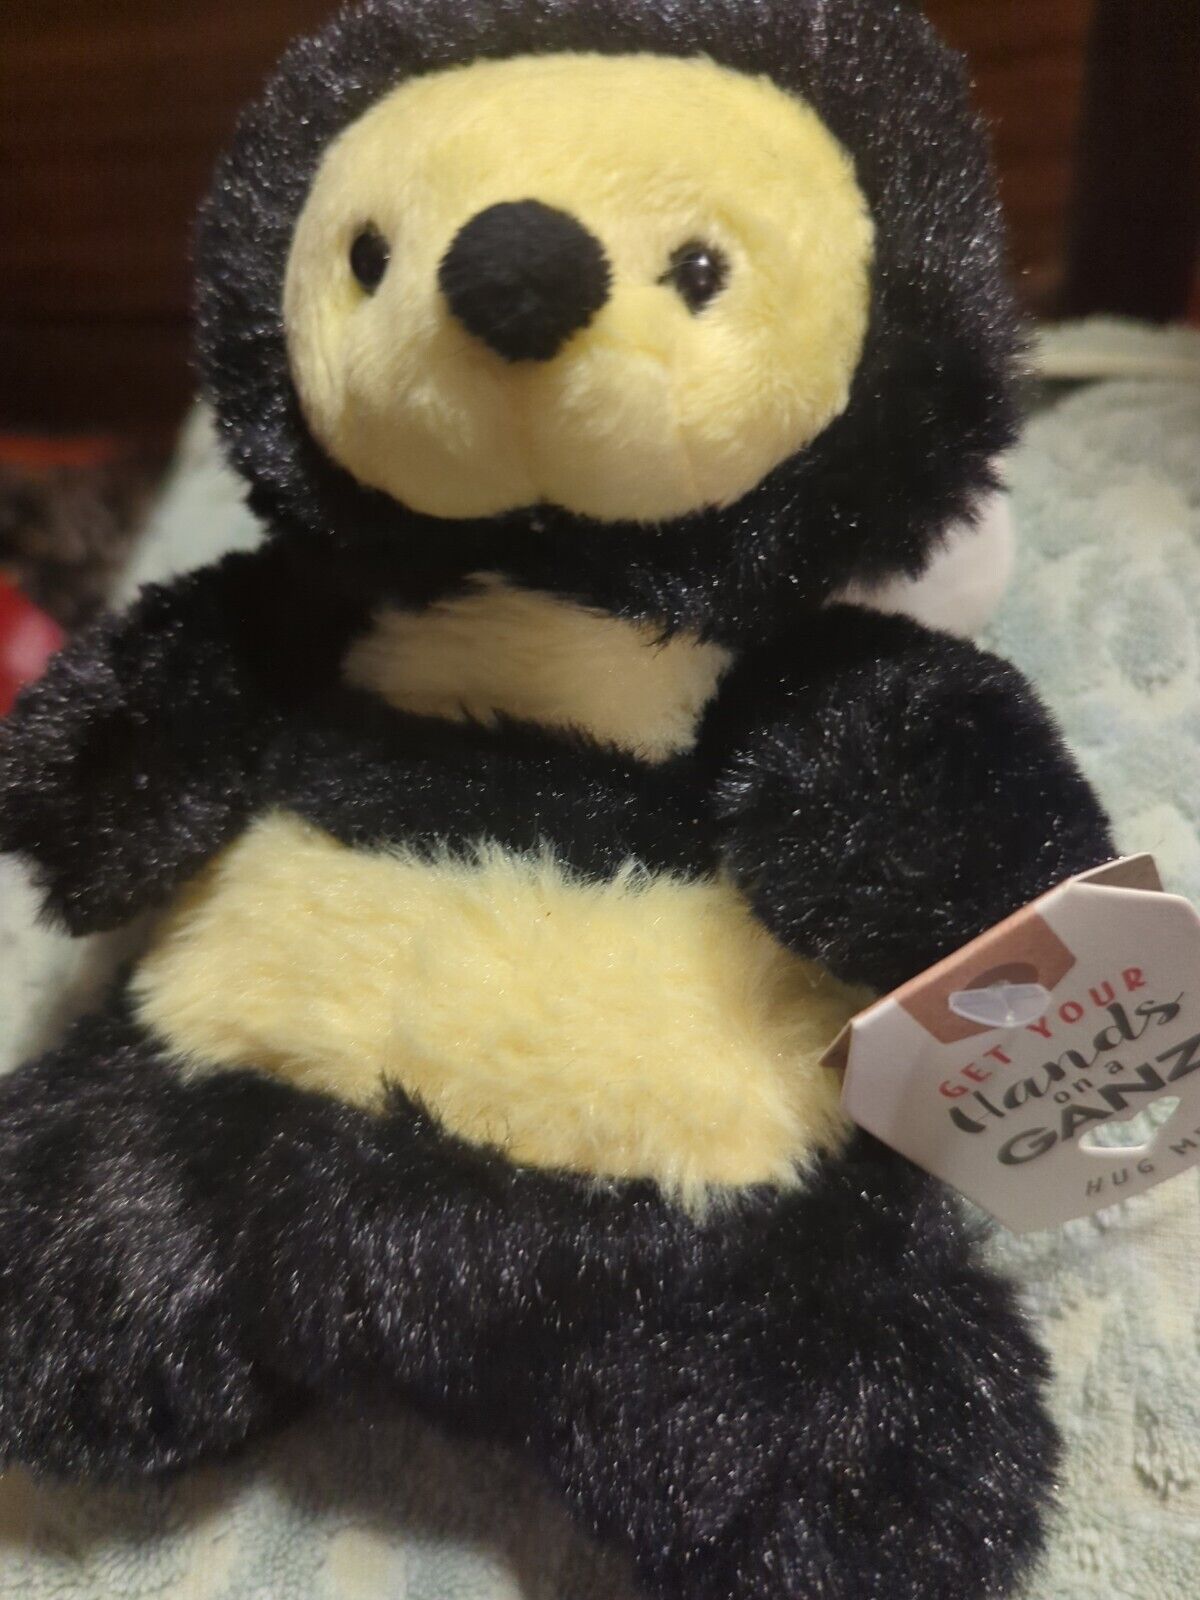 Get Your Hands On A Ganz Teacup  Bumblebee 7" H8909 soft plush NWT